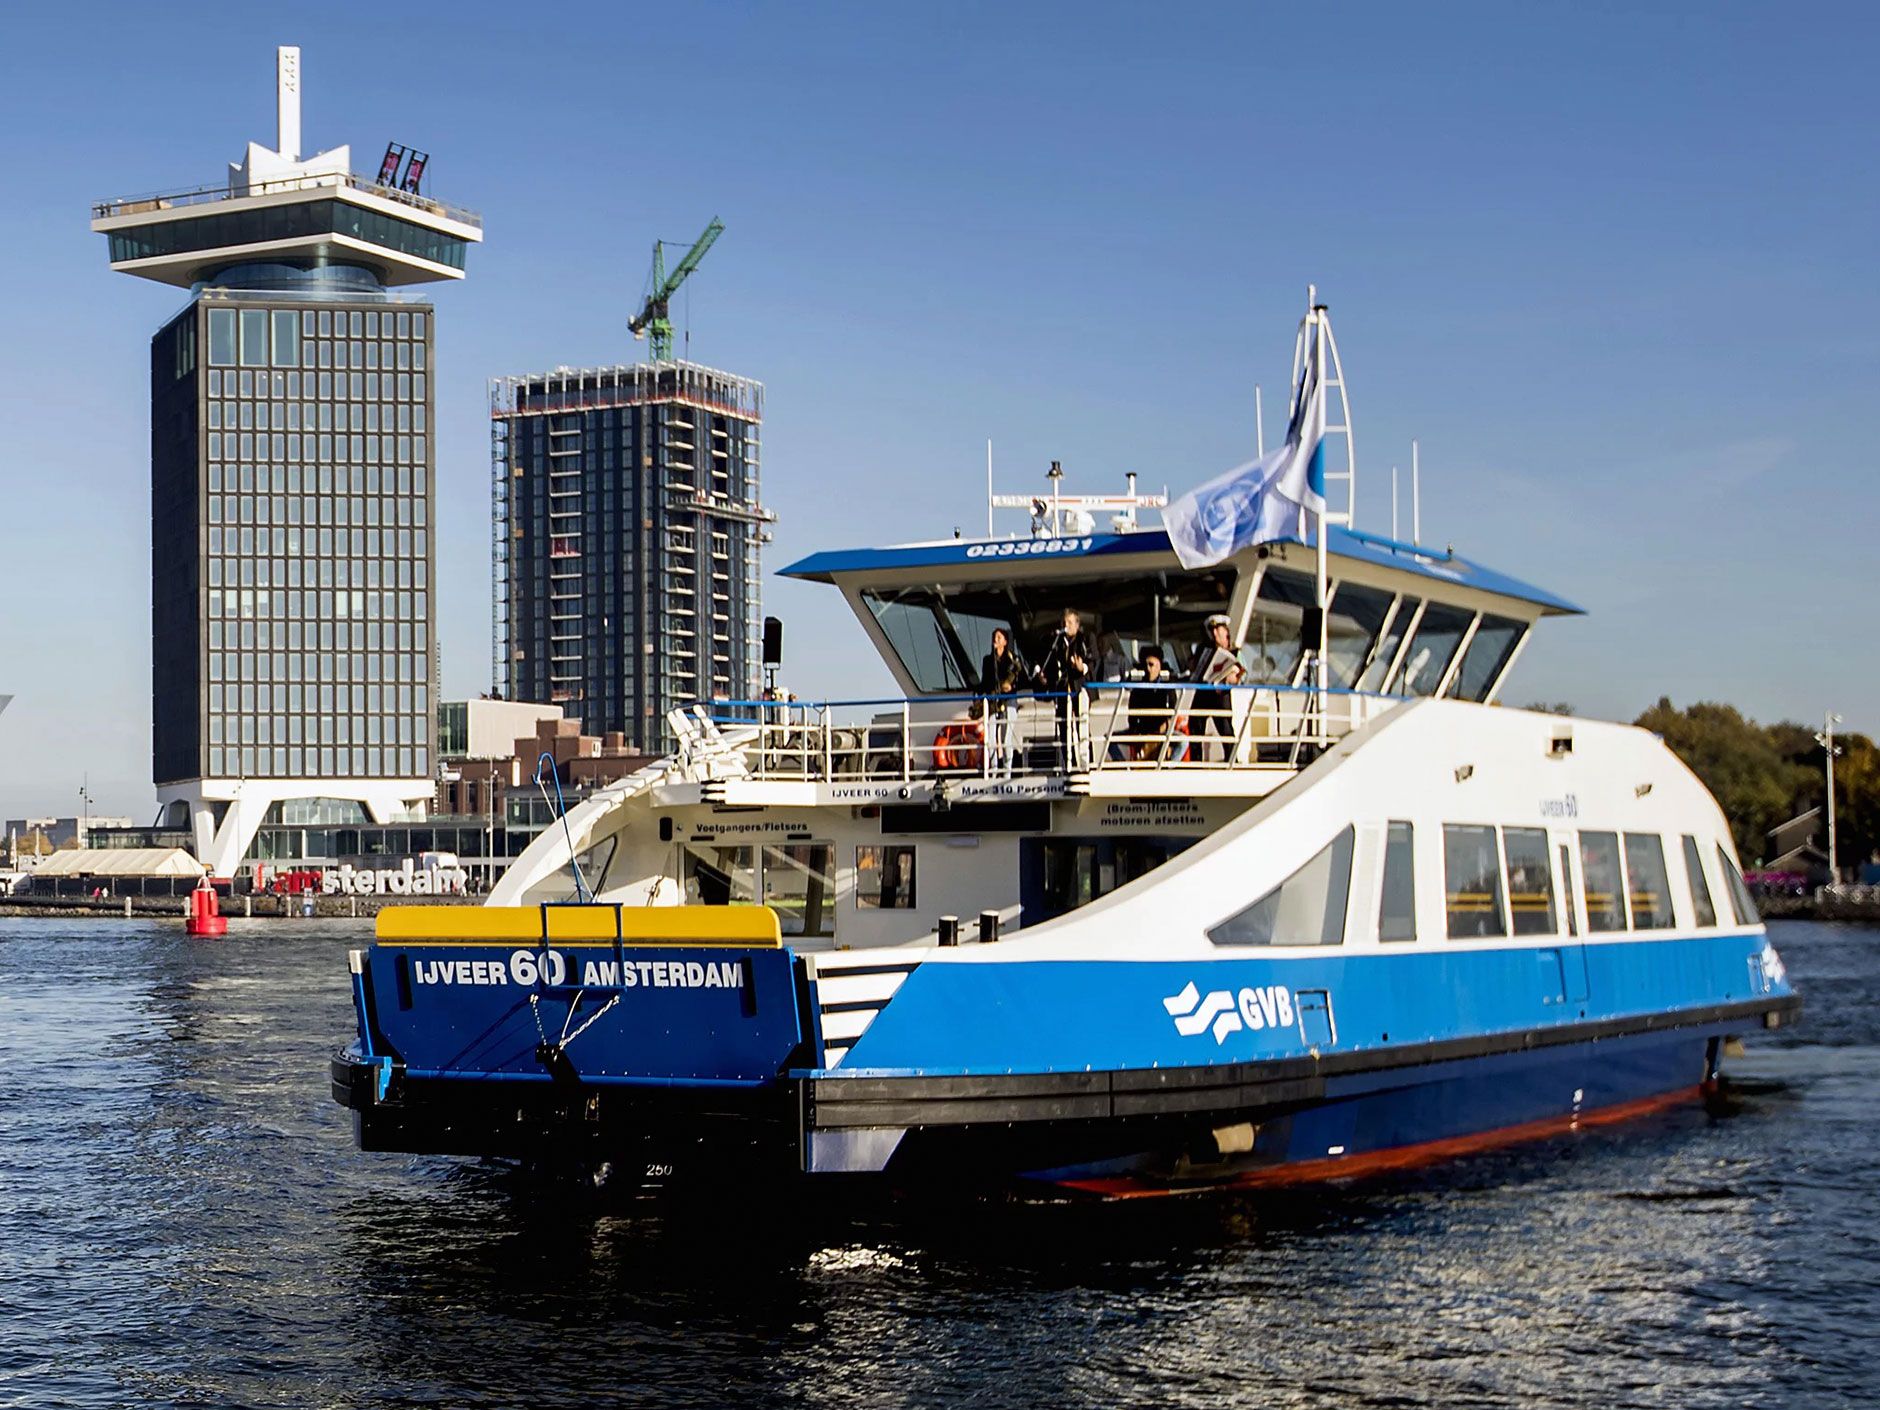 The hybrid <em>IJveer 60</em> carries passengers and cars around Amsterdam along with its sister ferry, the <em>IJveer 61</em>.